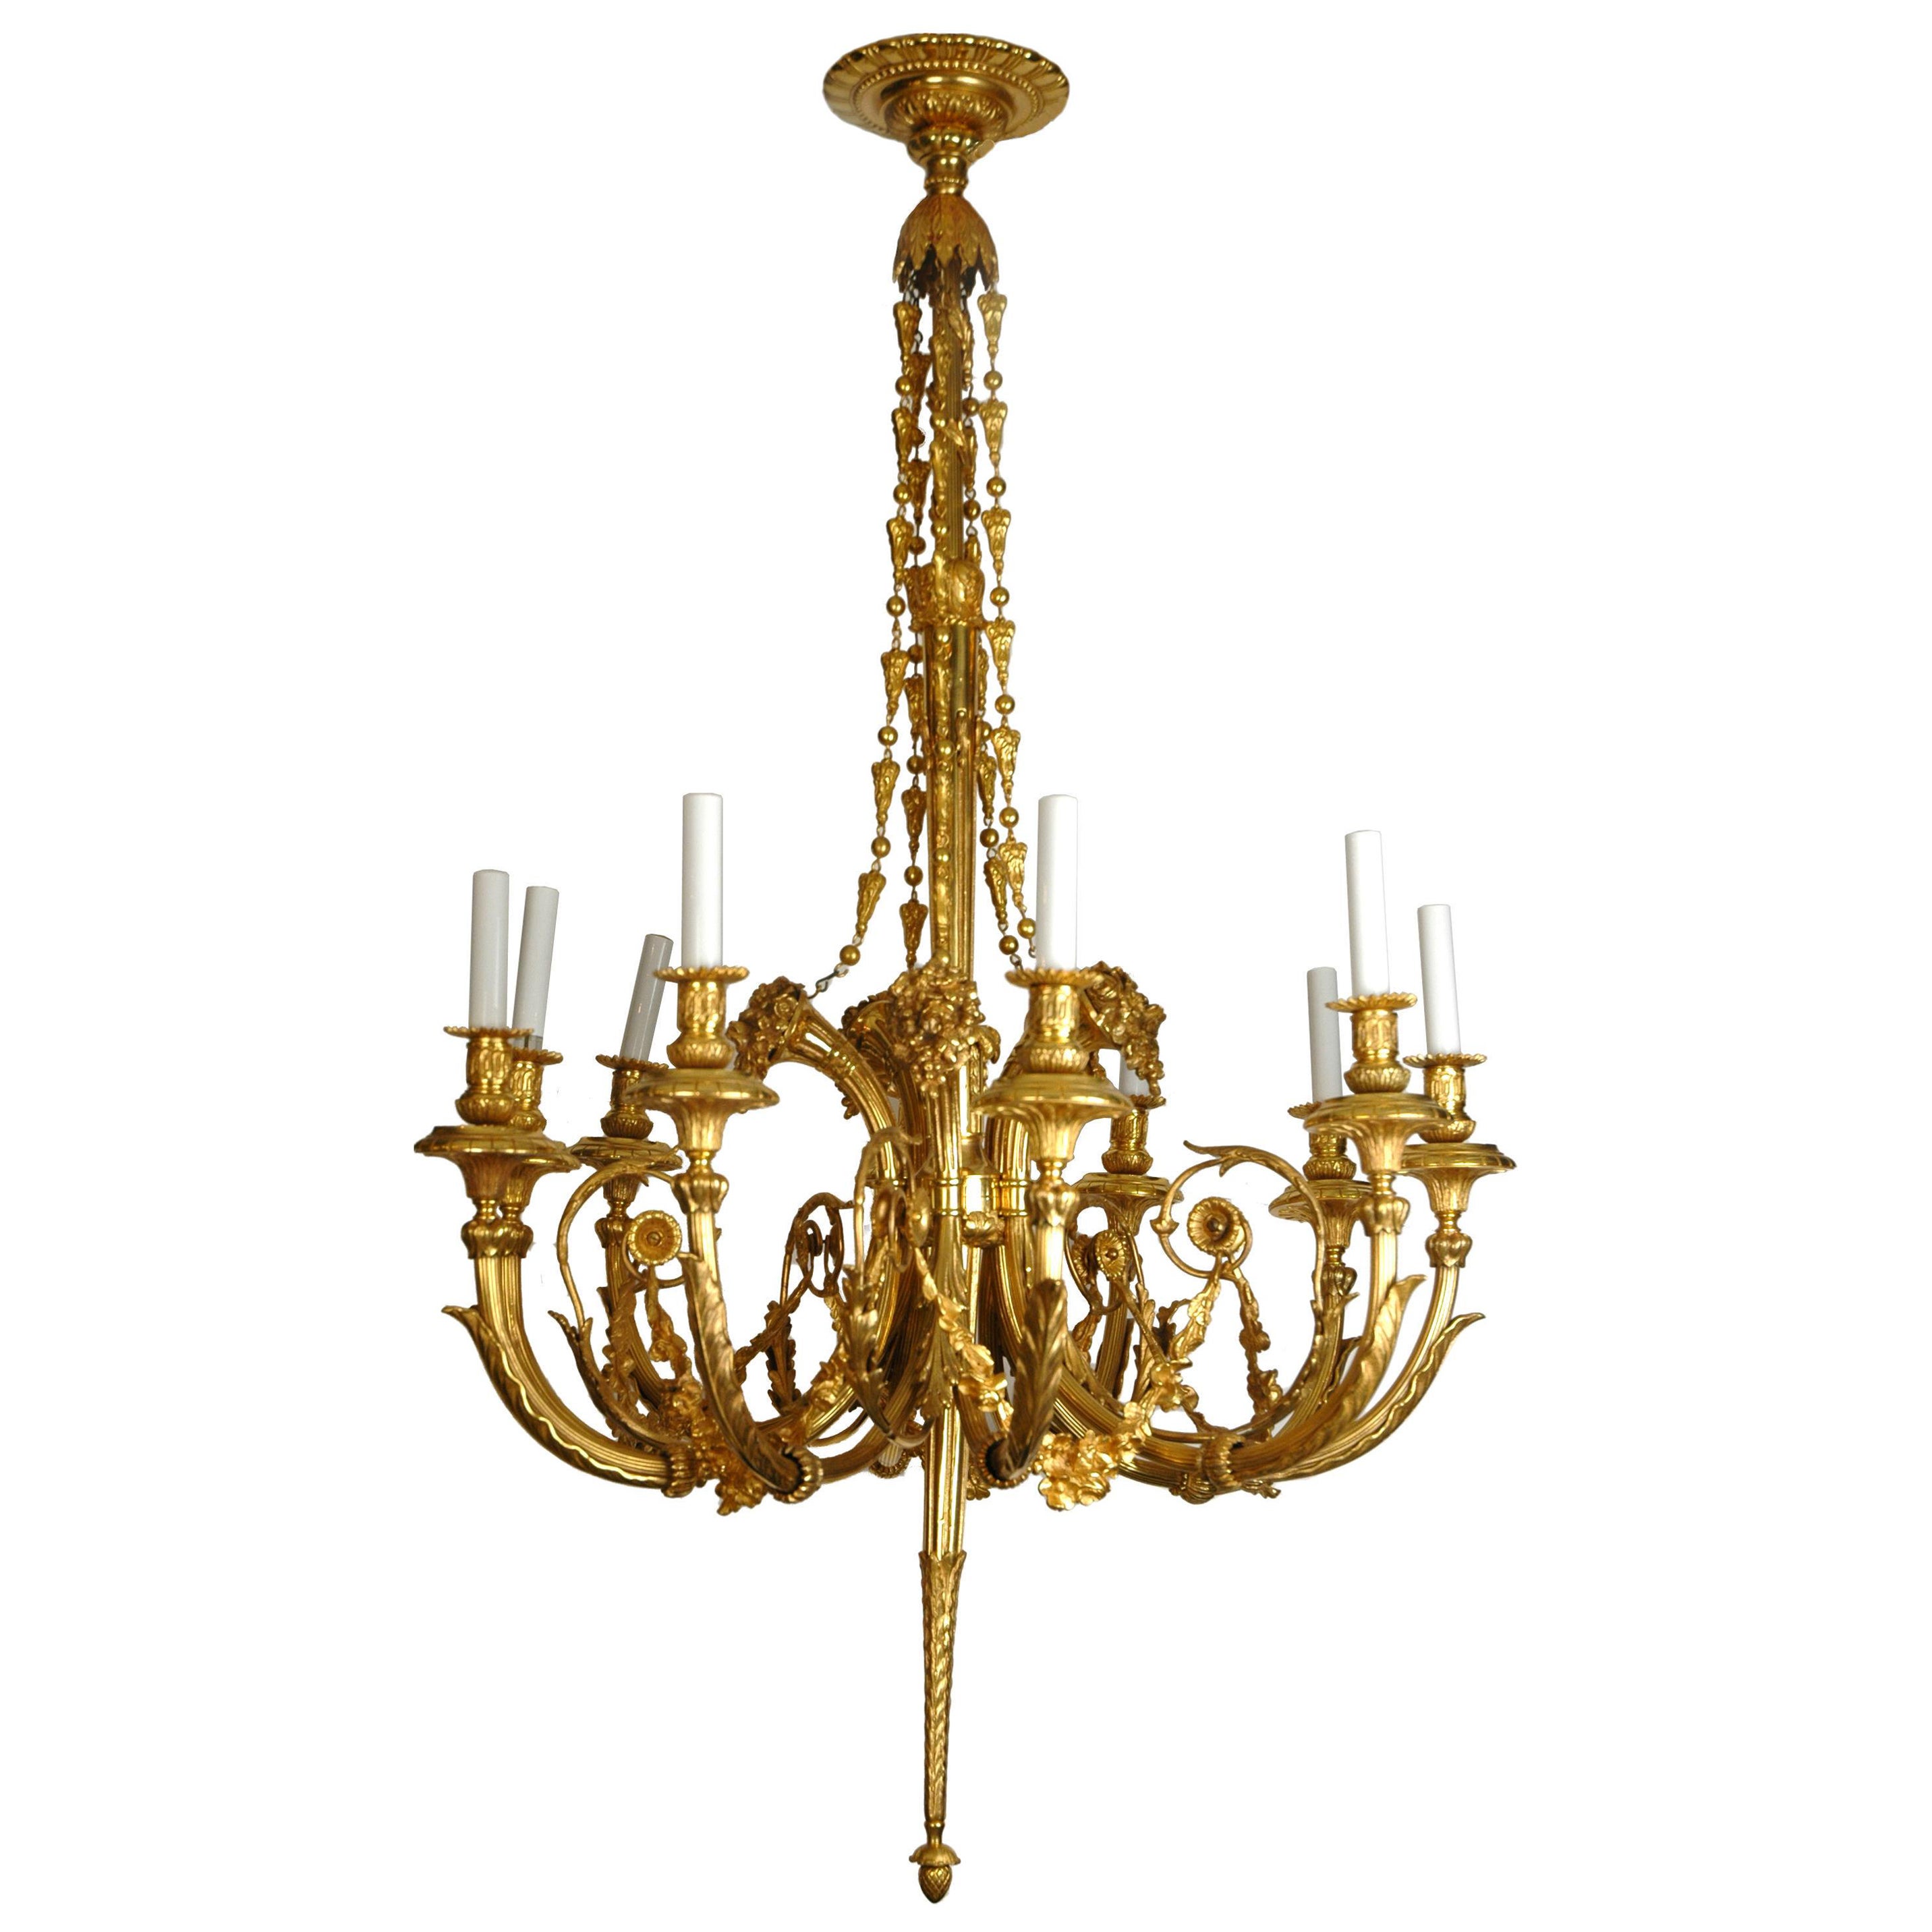 French 19th Century Louis XVI Style 10 Light Gilt Bronze Chandelier For Sale